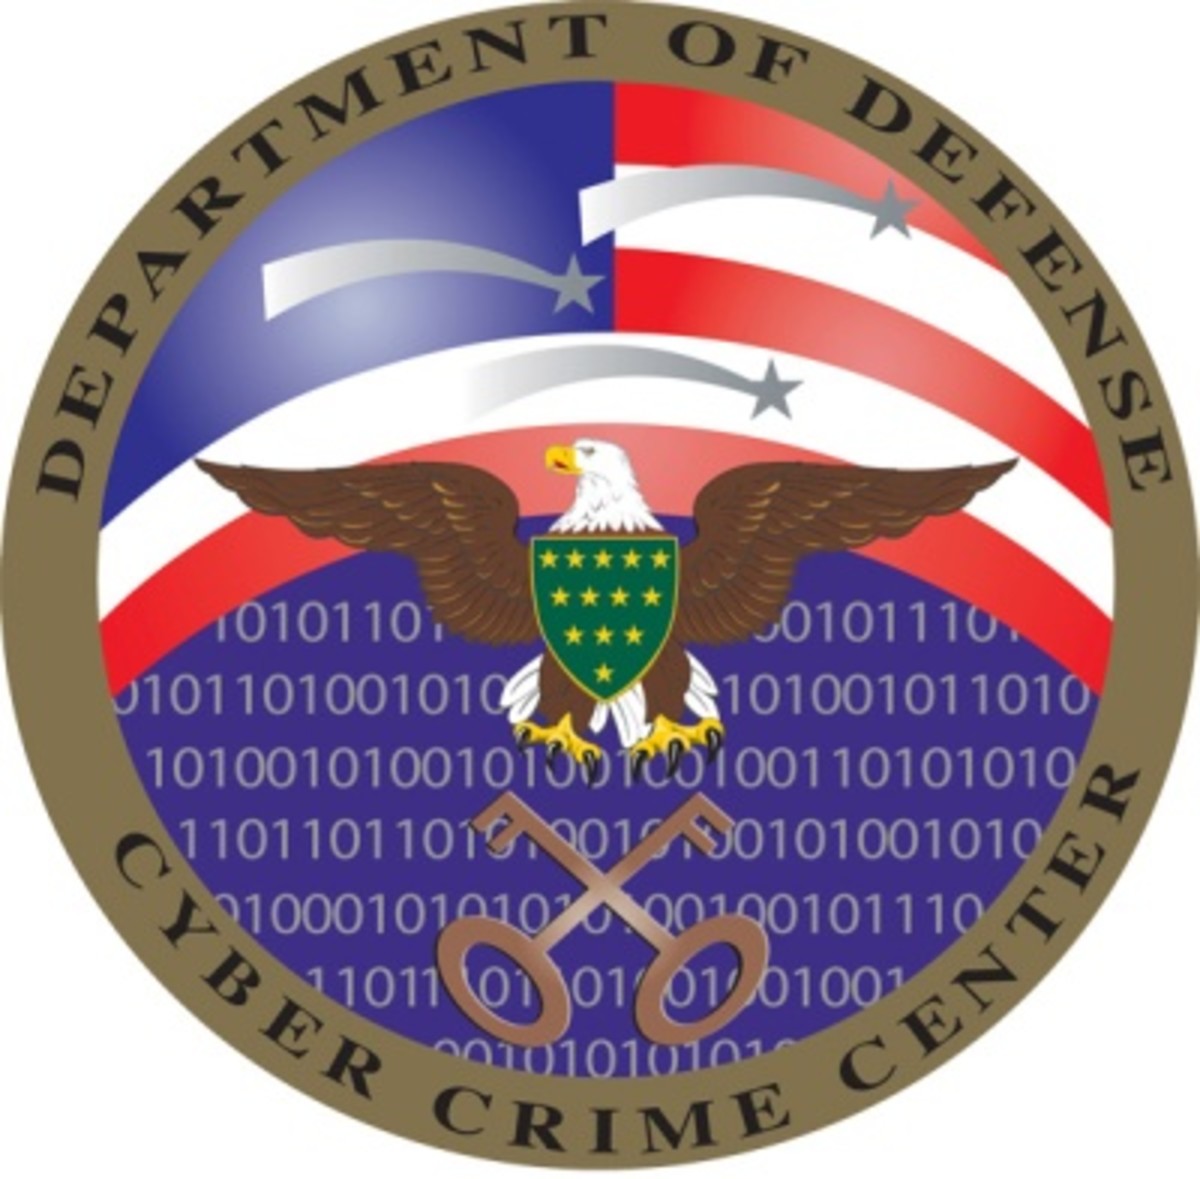 Official seal of the Department of Defense Cyber Crime Center